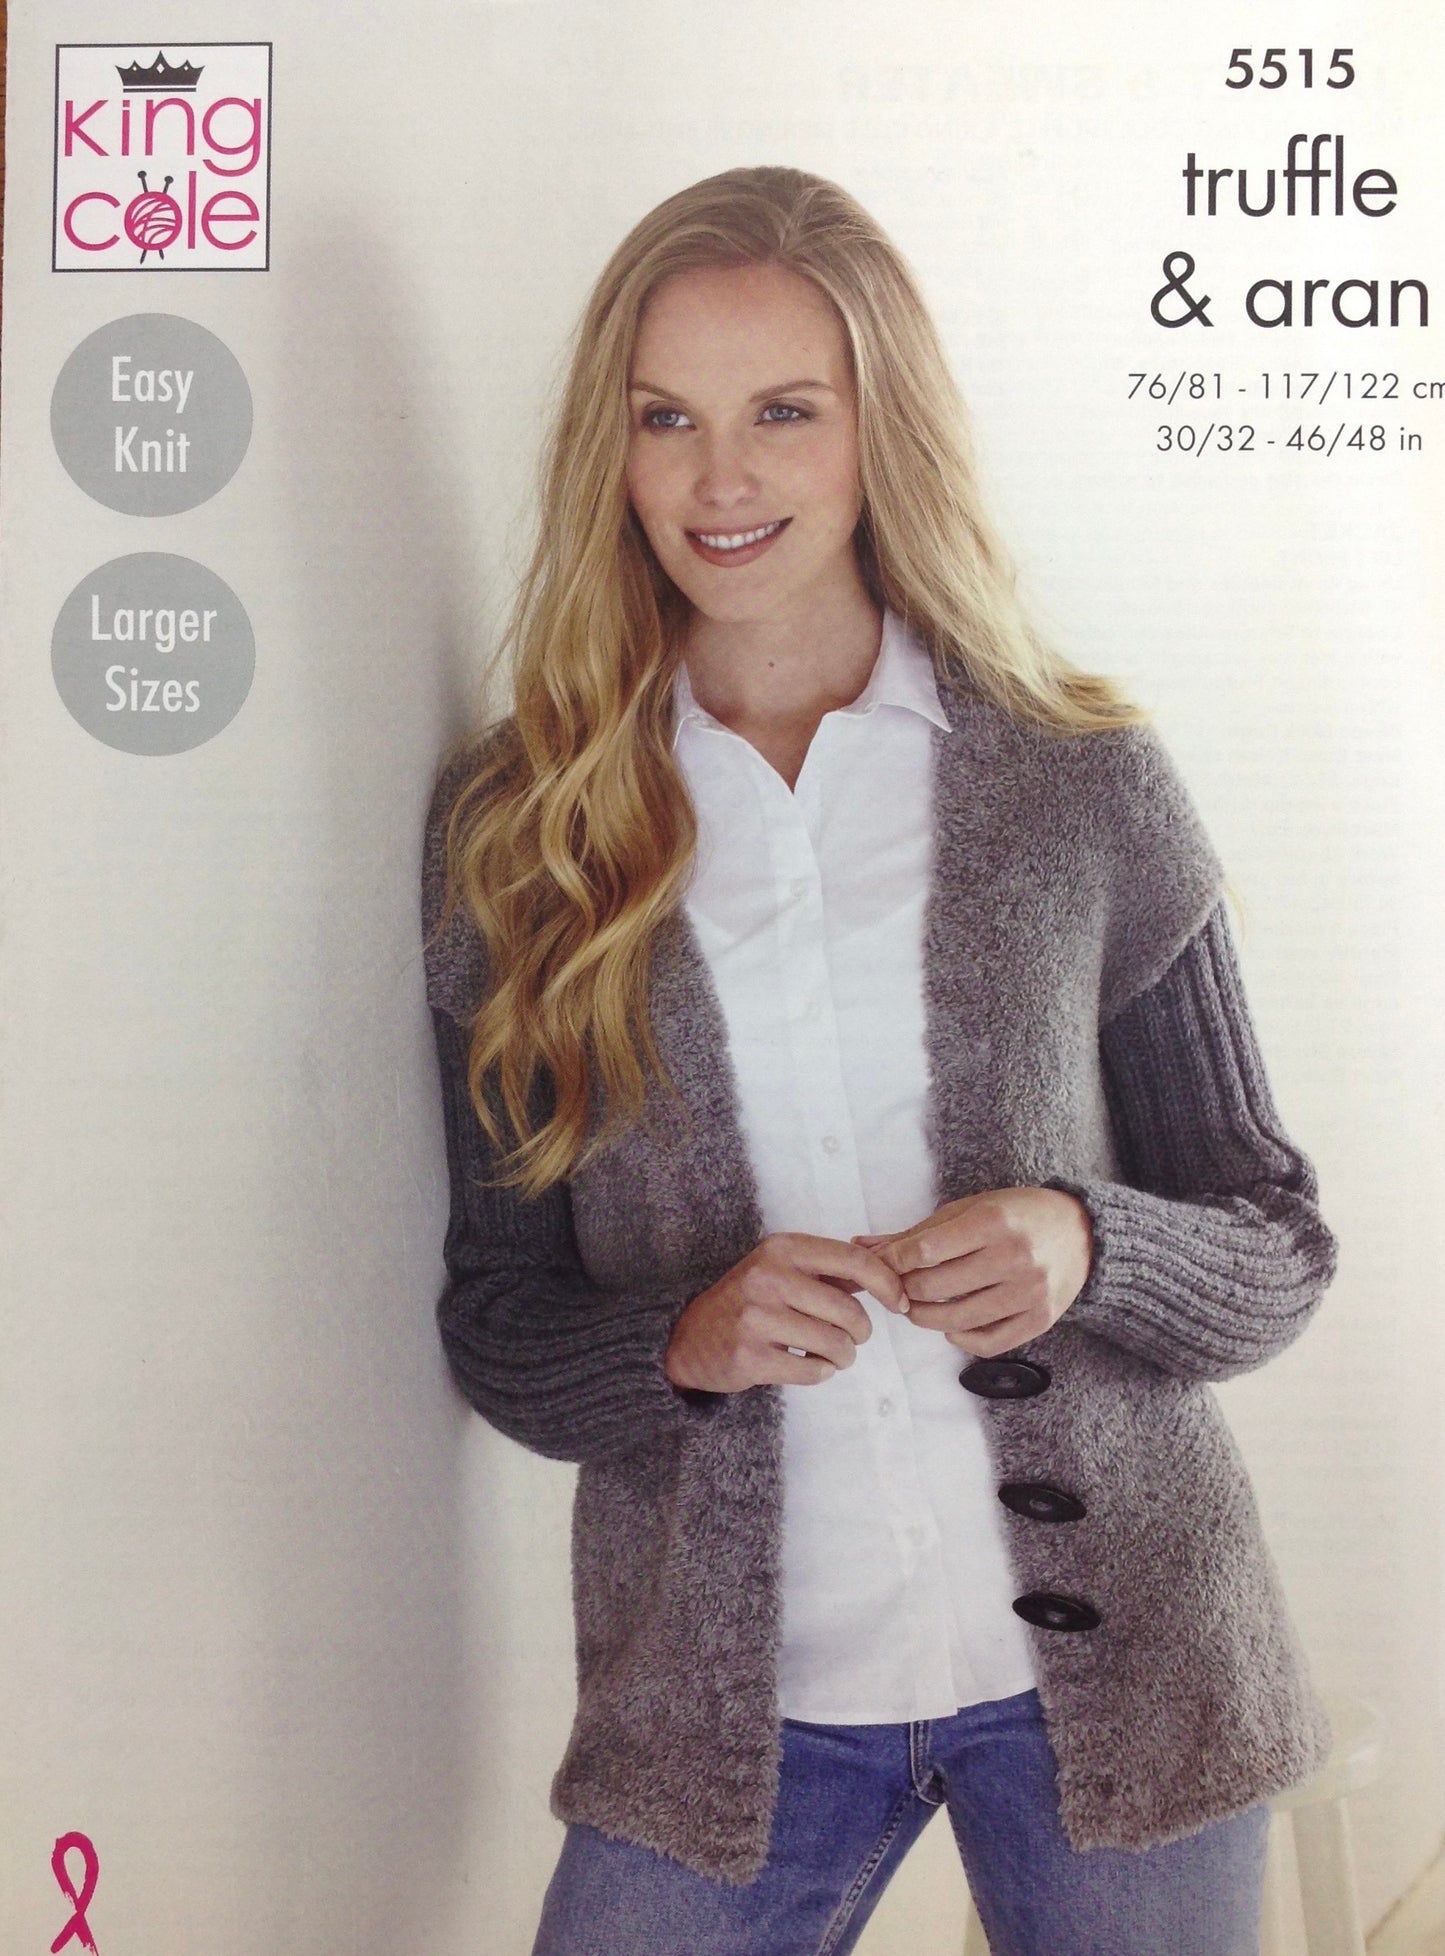 5515 King Cole truffle and Aran ladies jacket and sweater knitting pattern